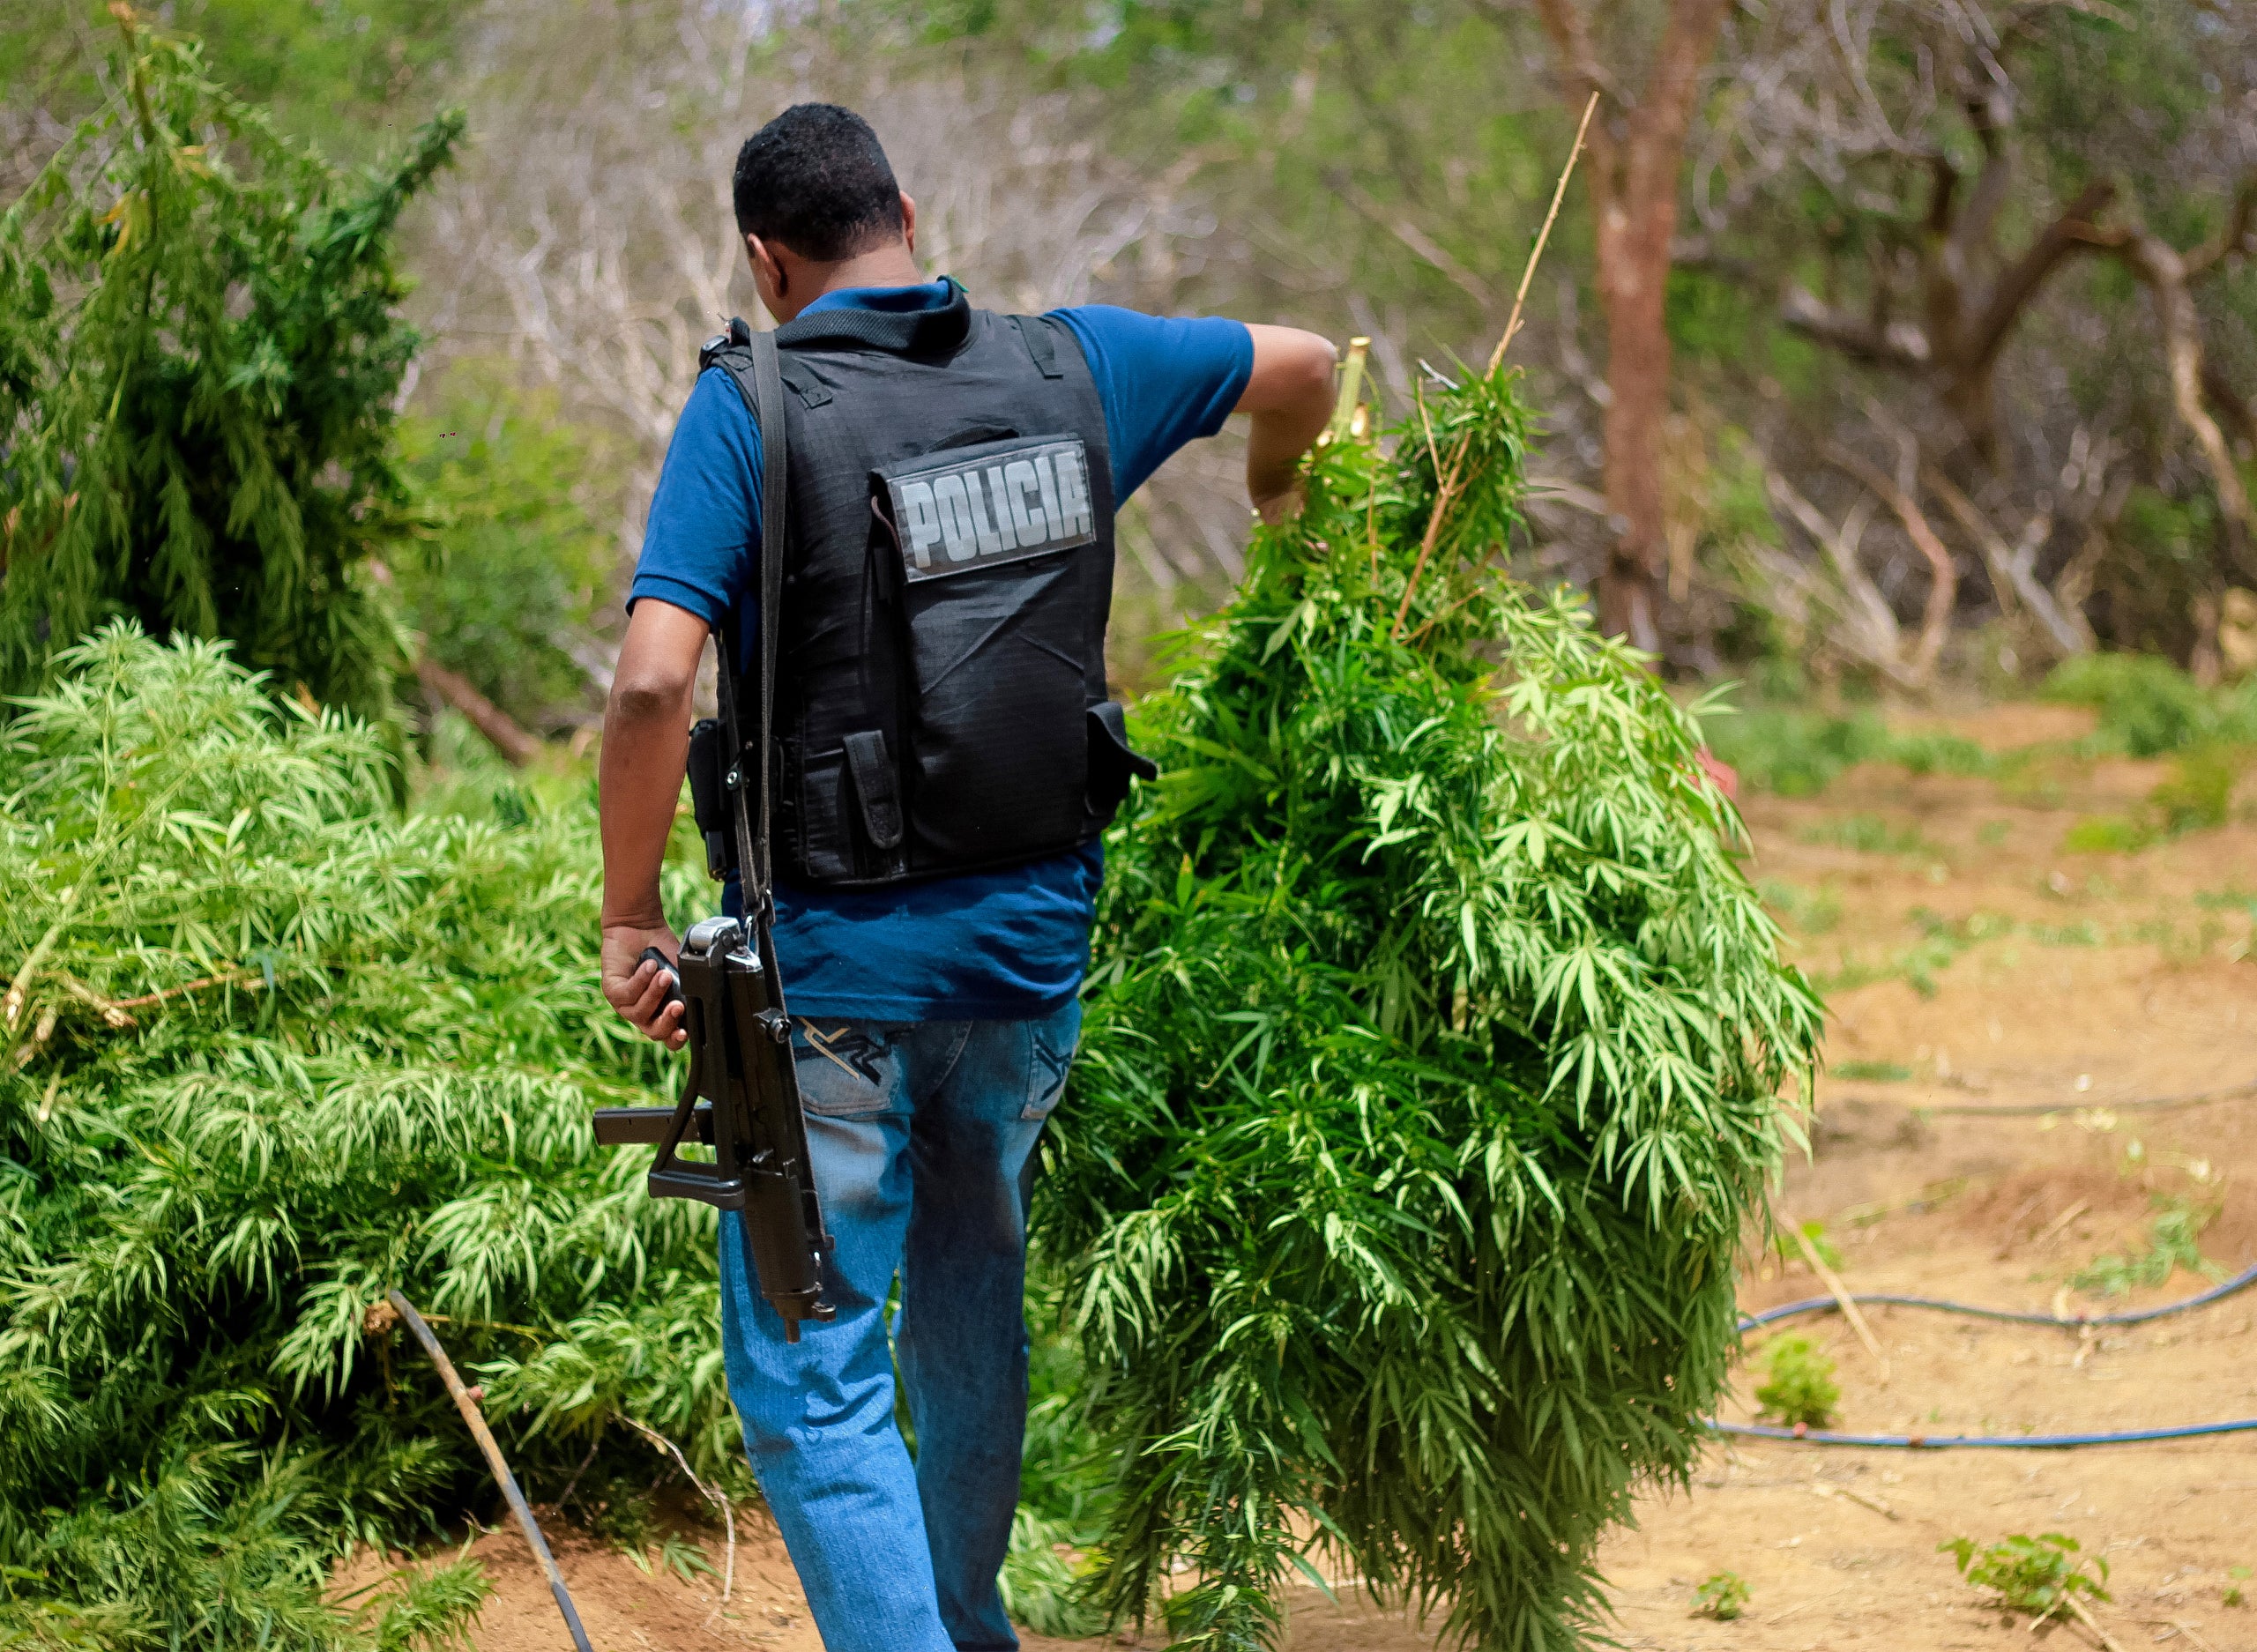 $1 Billion Worth Of Illegal Cannabis Seized In California Over The Past Year, Regulators Confirm